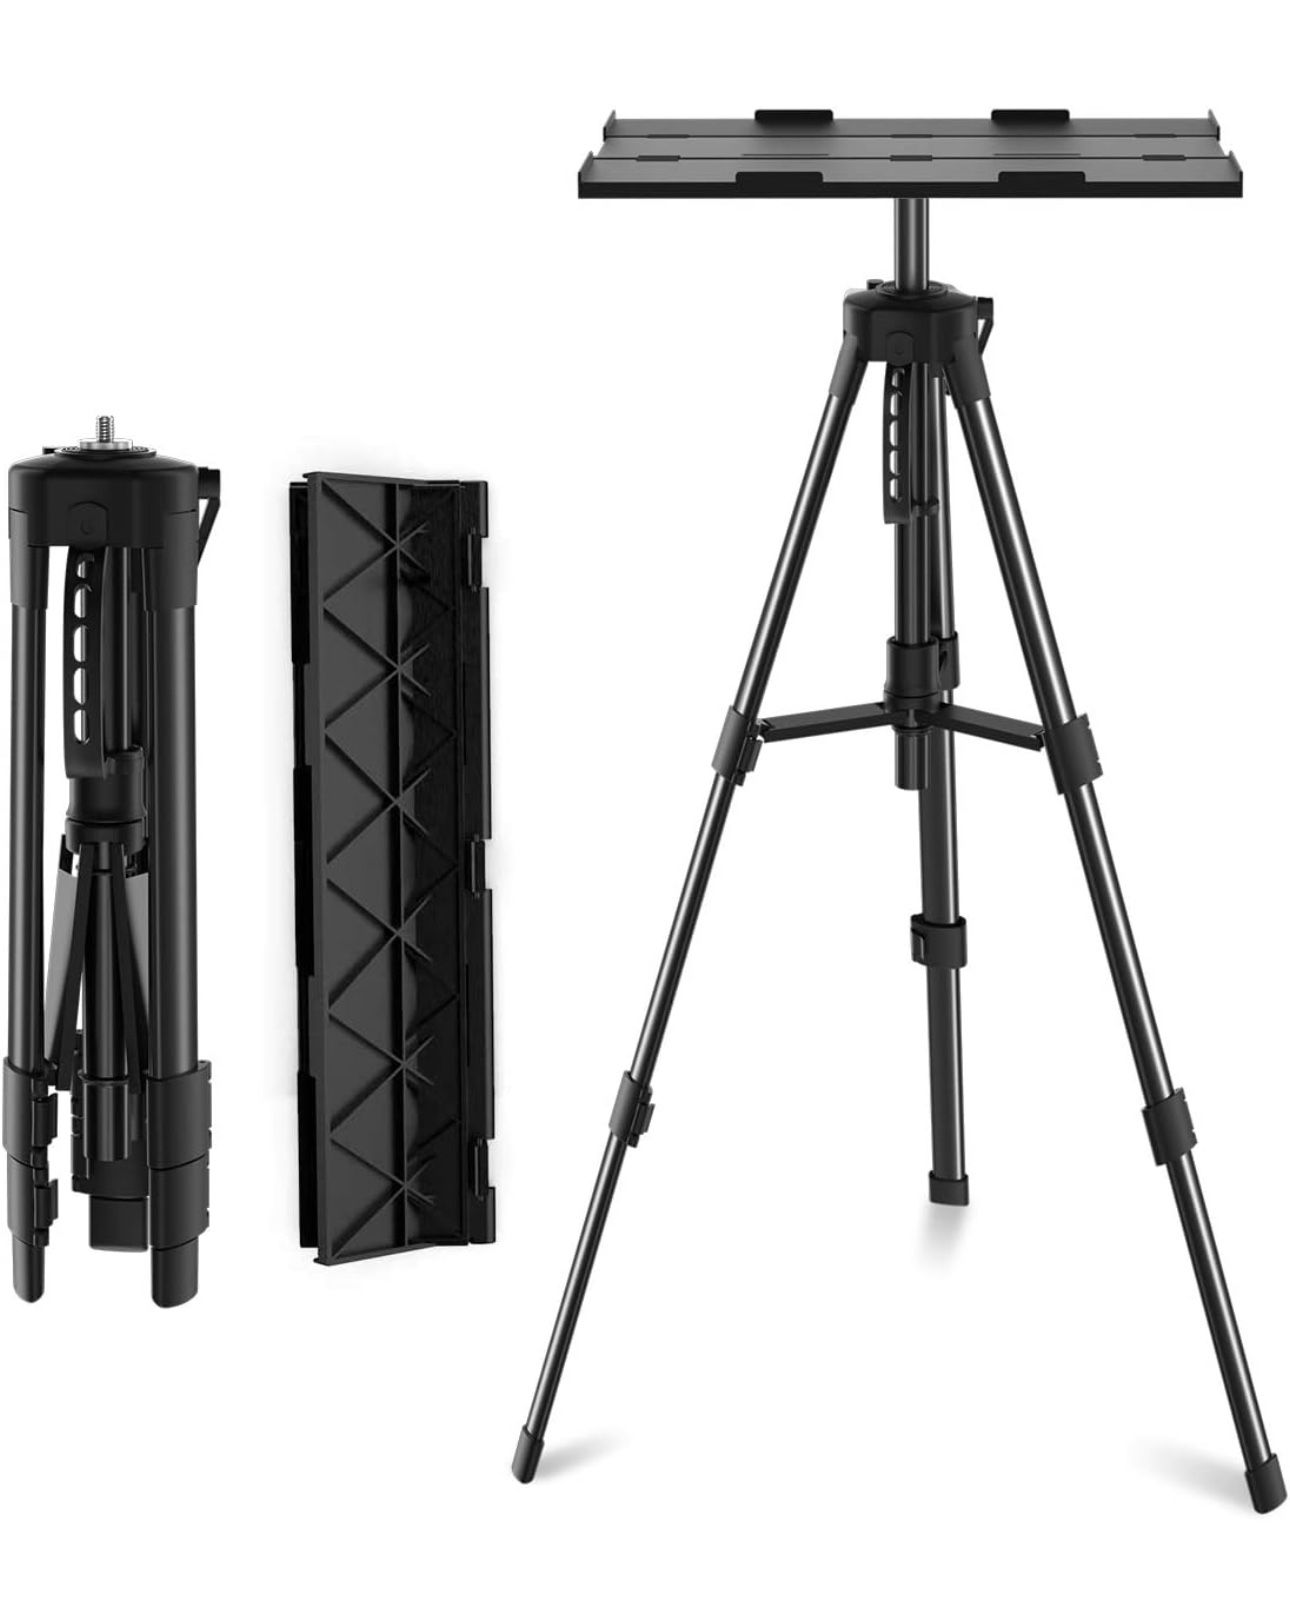 Projector Stand, Tripod Laptop Stand, Portable Adjustable Projector Stand